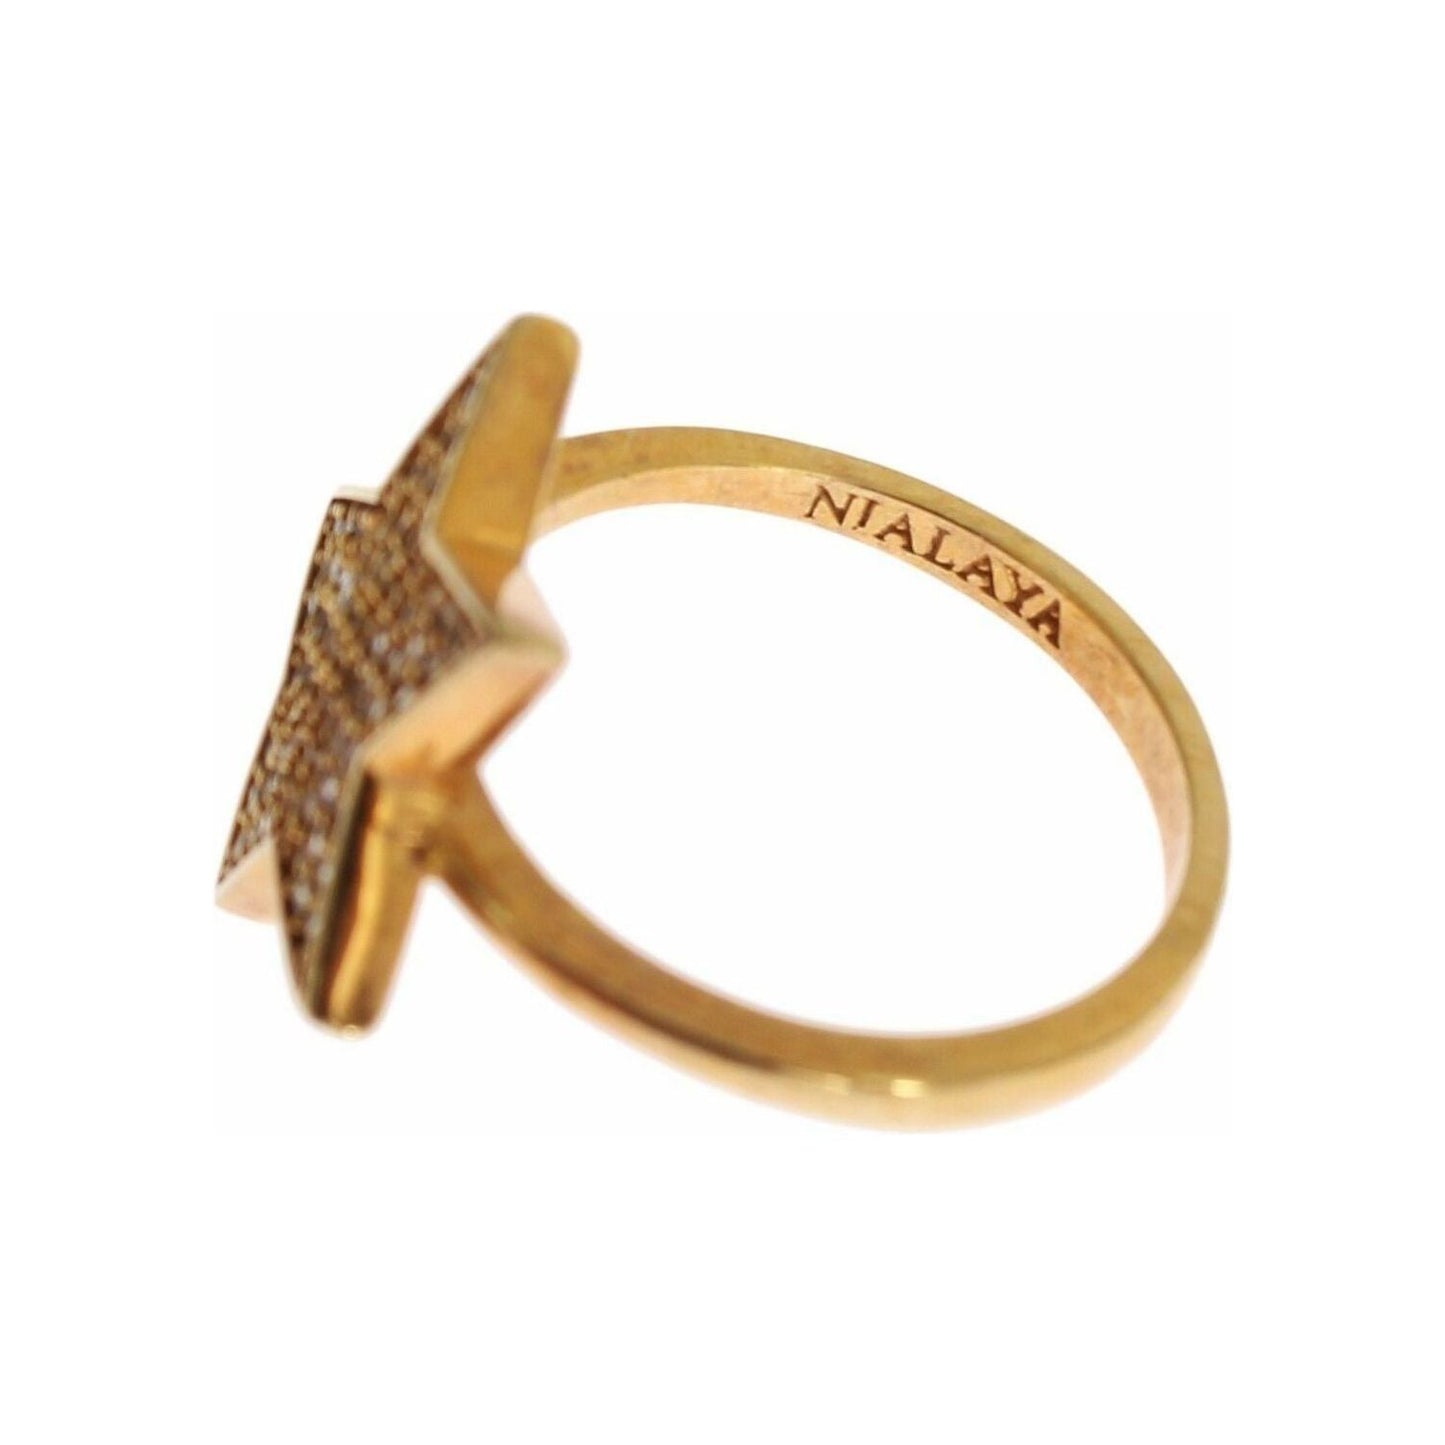 Nialaya Elegant Gold-Plated Sterling Silver Ring with CZ Crystals Ring star-gold-925-silver-womens-clear-ring s-l1600-68-2-2d671390-461.jpg